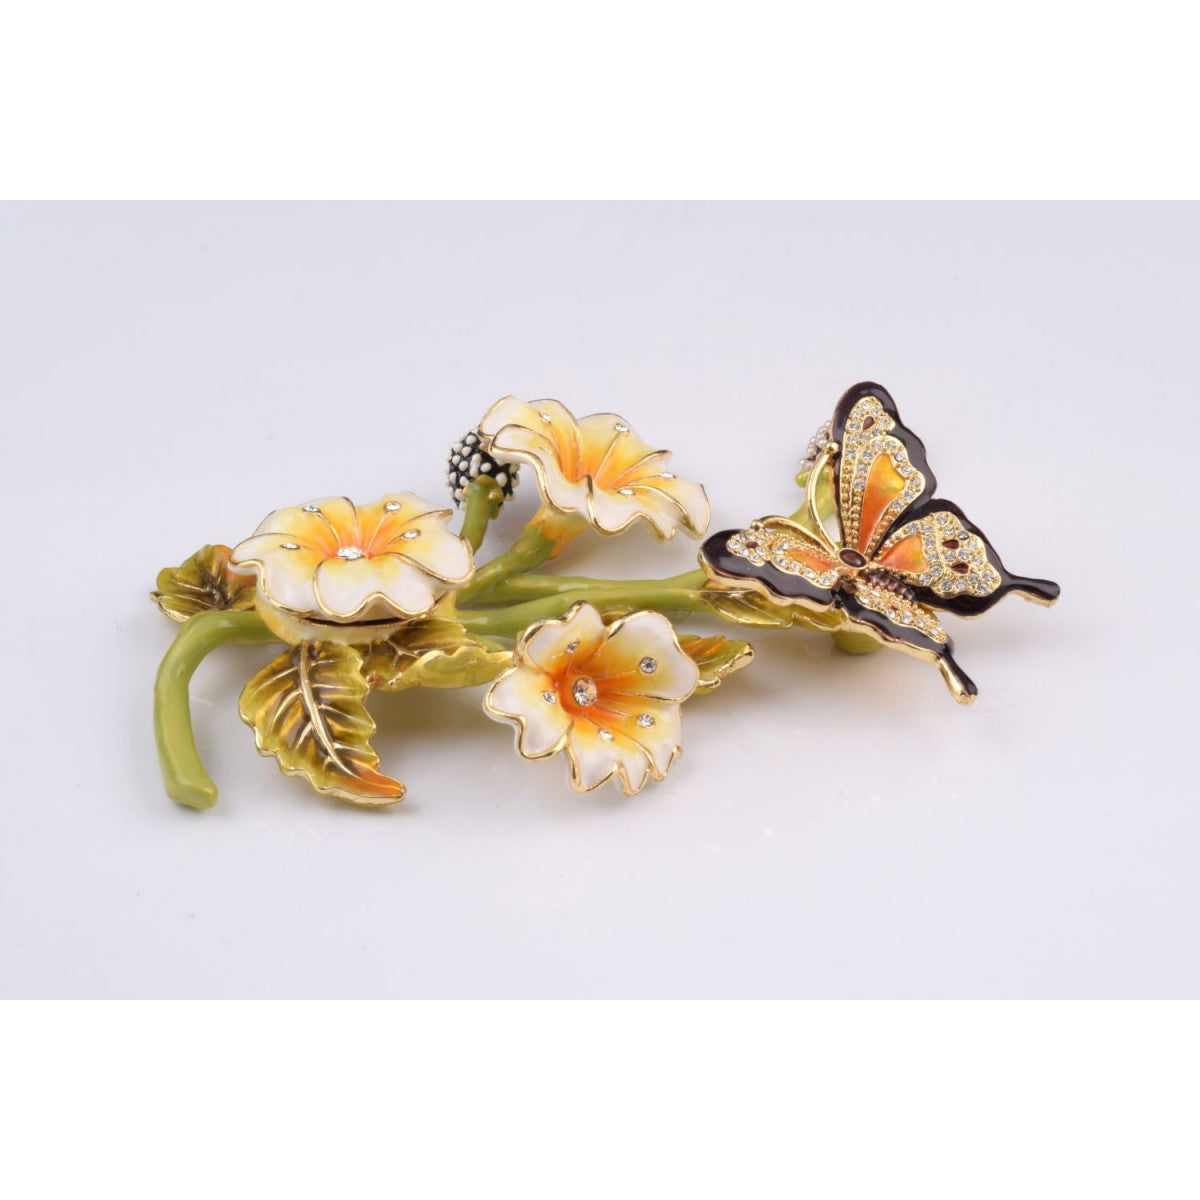 Butterfly on Branch with Flowers